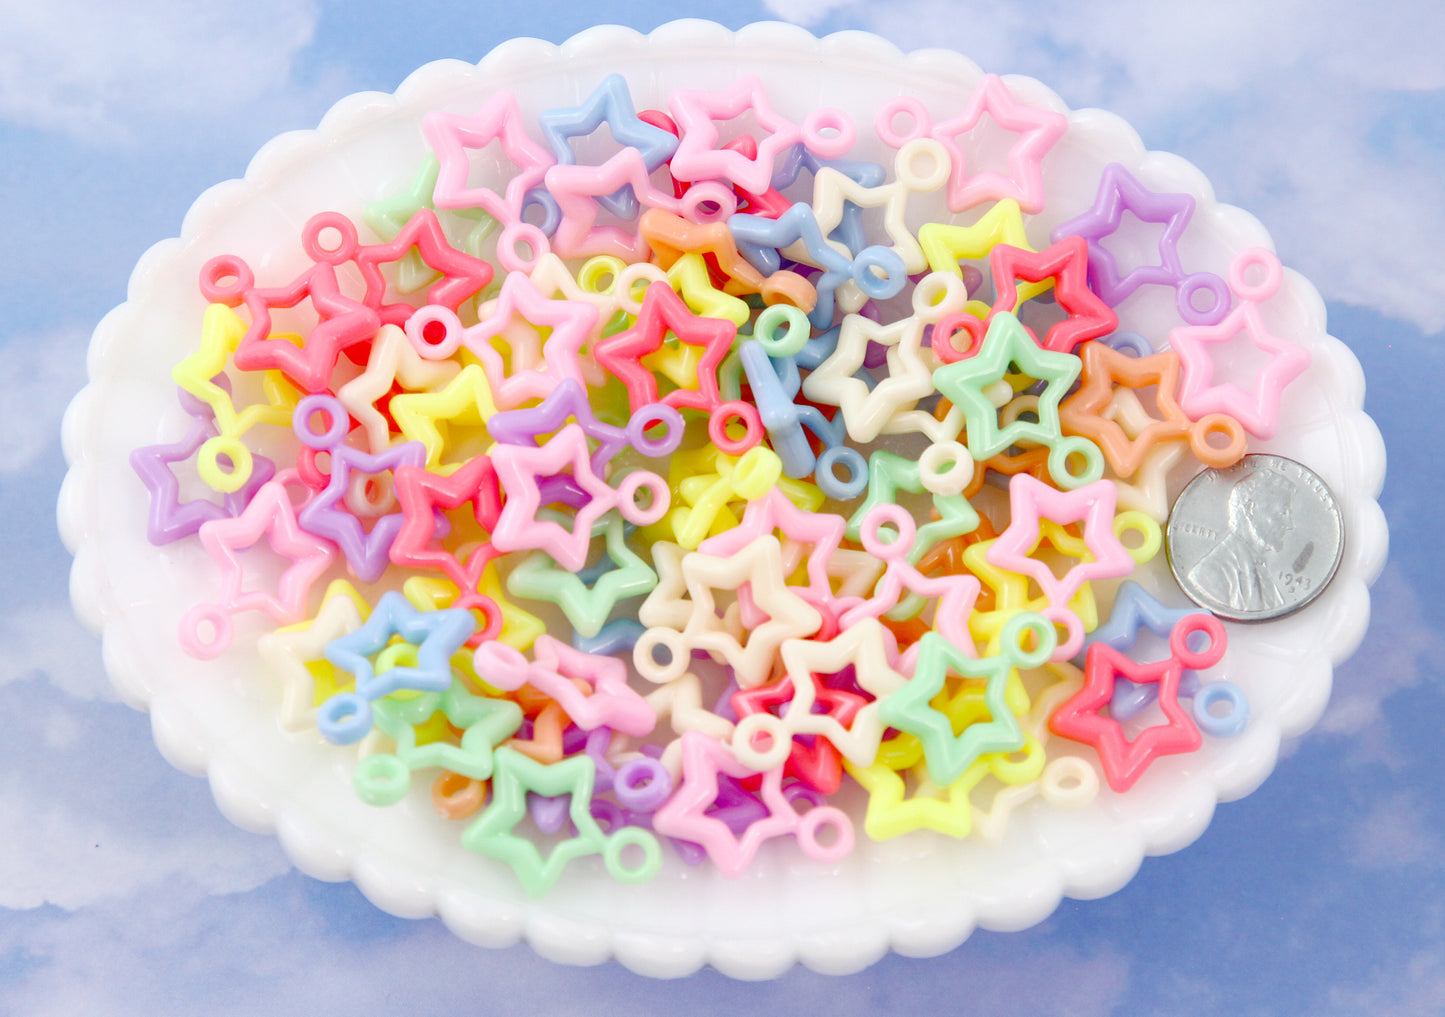 Plastic Star Charms - 20mm Pastel Star Outline Plastic or Acrylic Charms or Pendants - 100 pc set